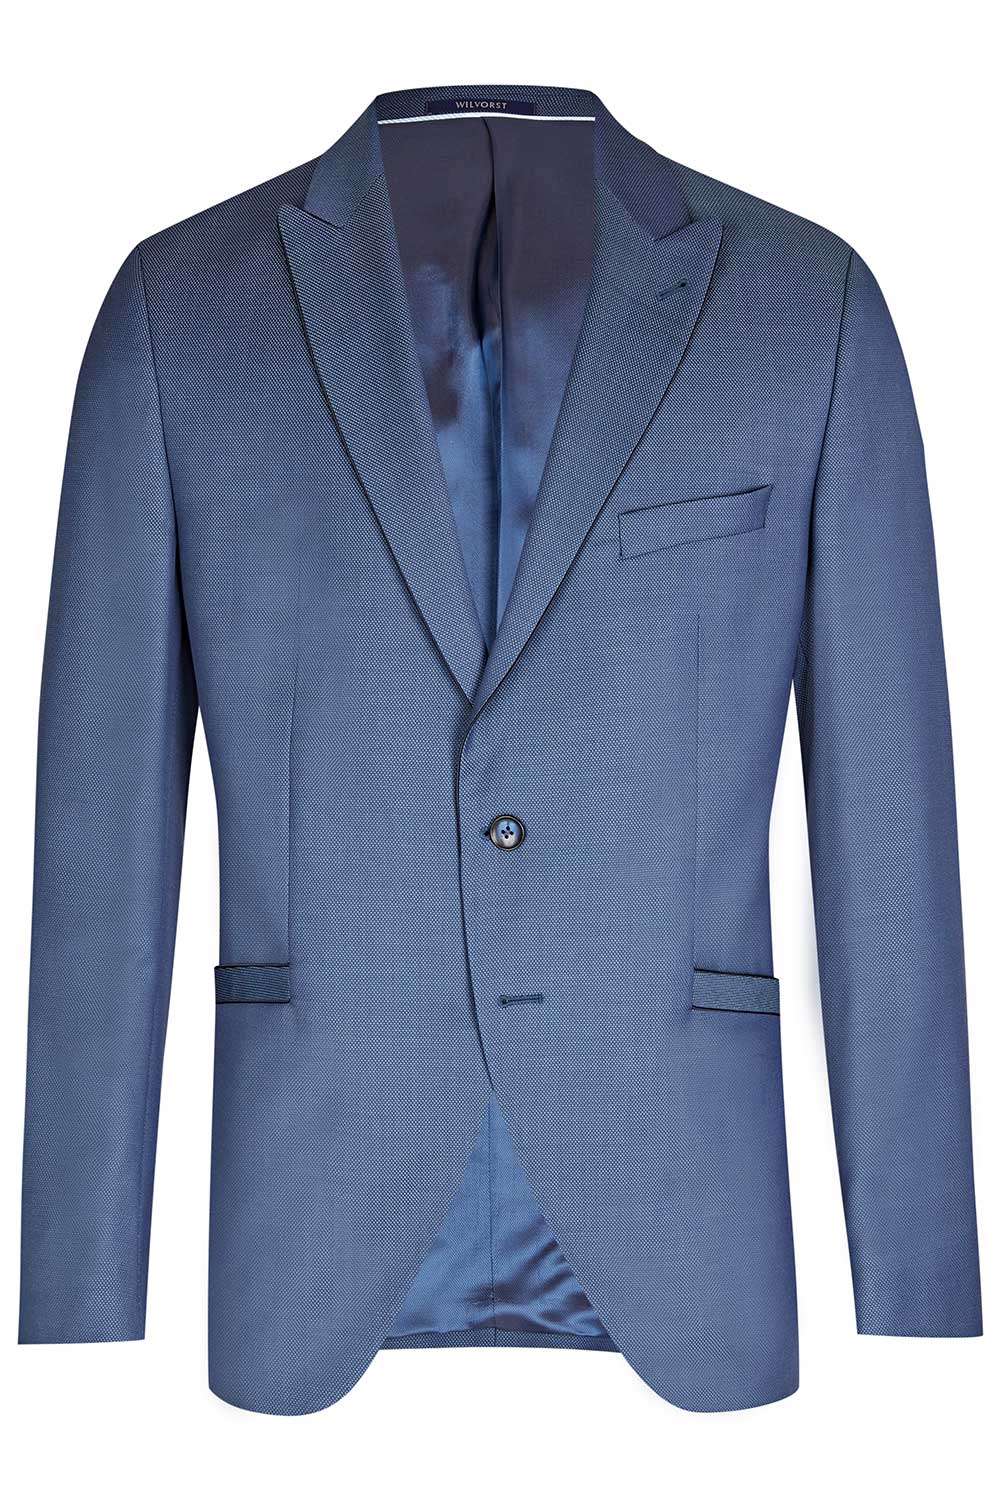 Dolphin Blue 3 piece Wedding Suit - Tom Murphy's Formal and Menswear